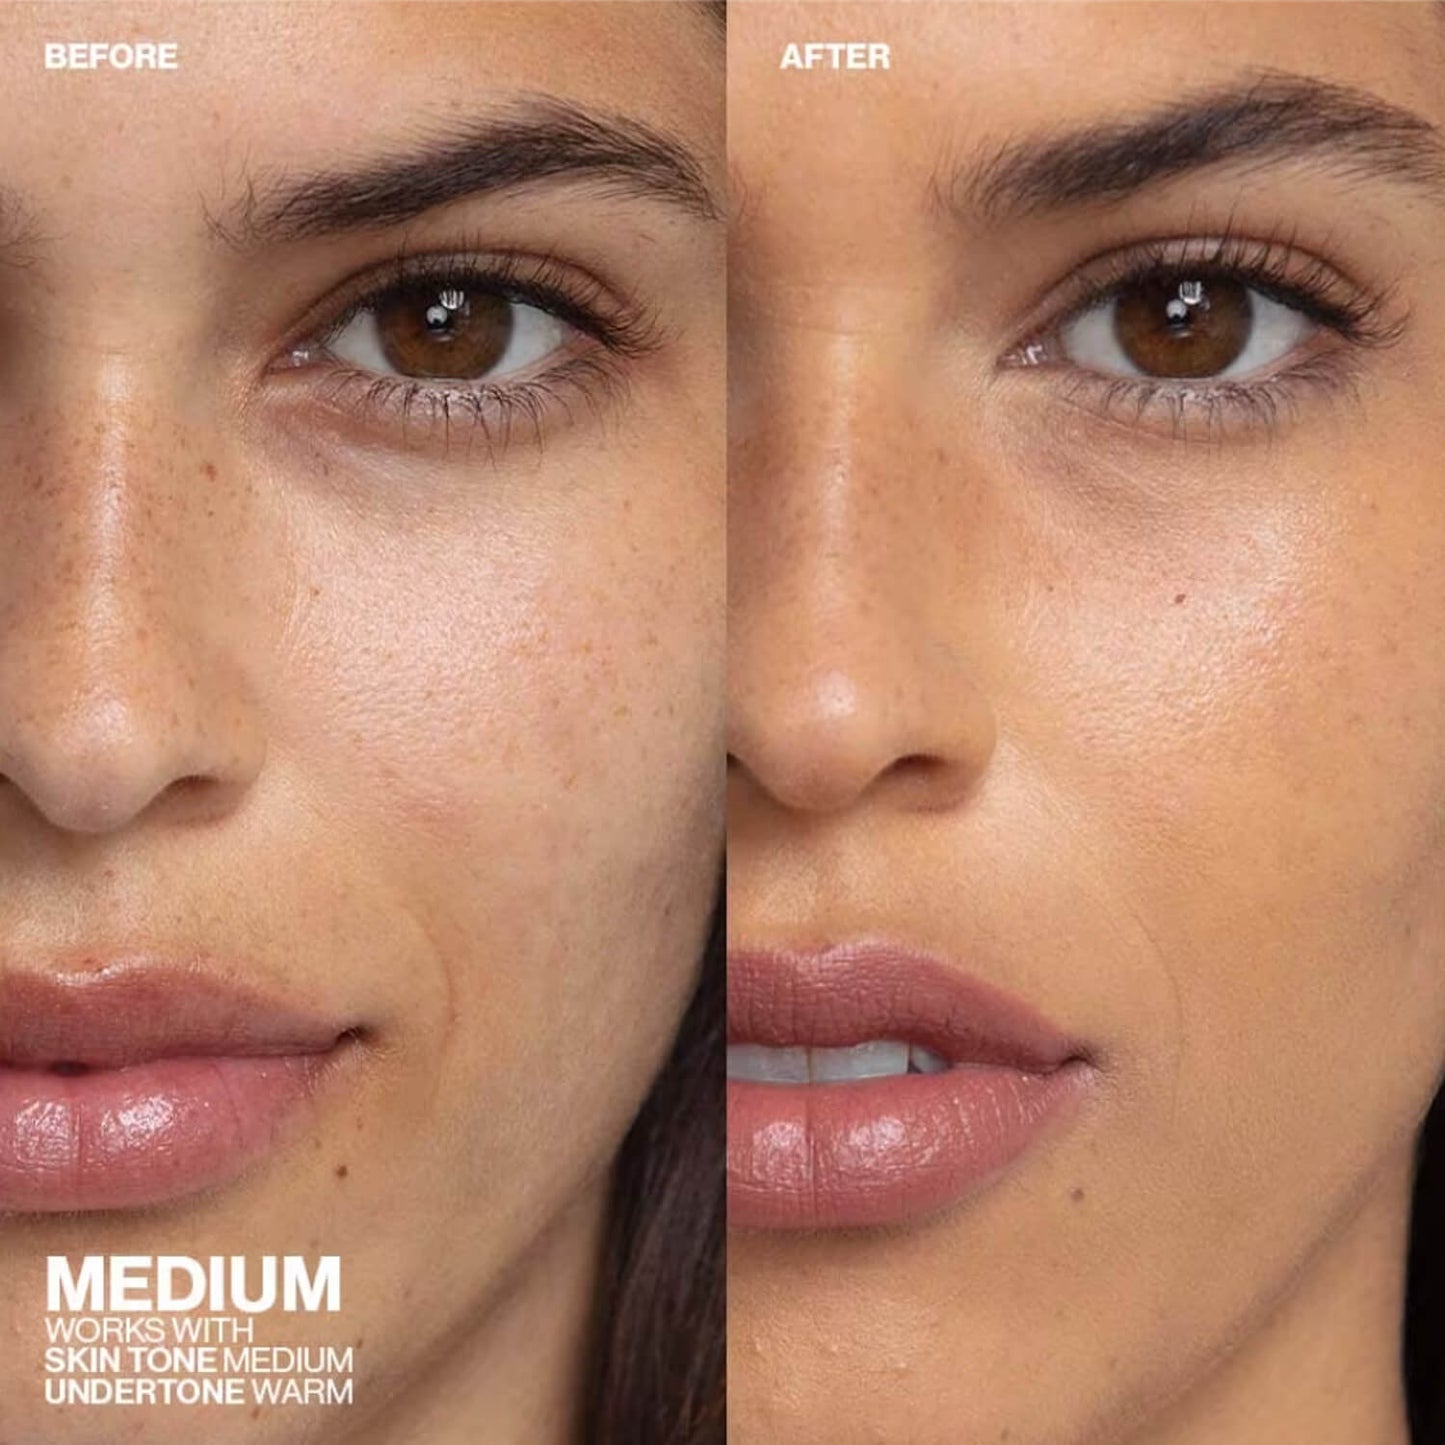 image showing Pakistani girl after using swatch of Smashbox Halo Glow Tinted Moisturizer Foundation in medium shade available at Heygirl.pk for delivery in Pakistan.